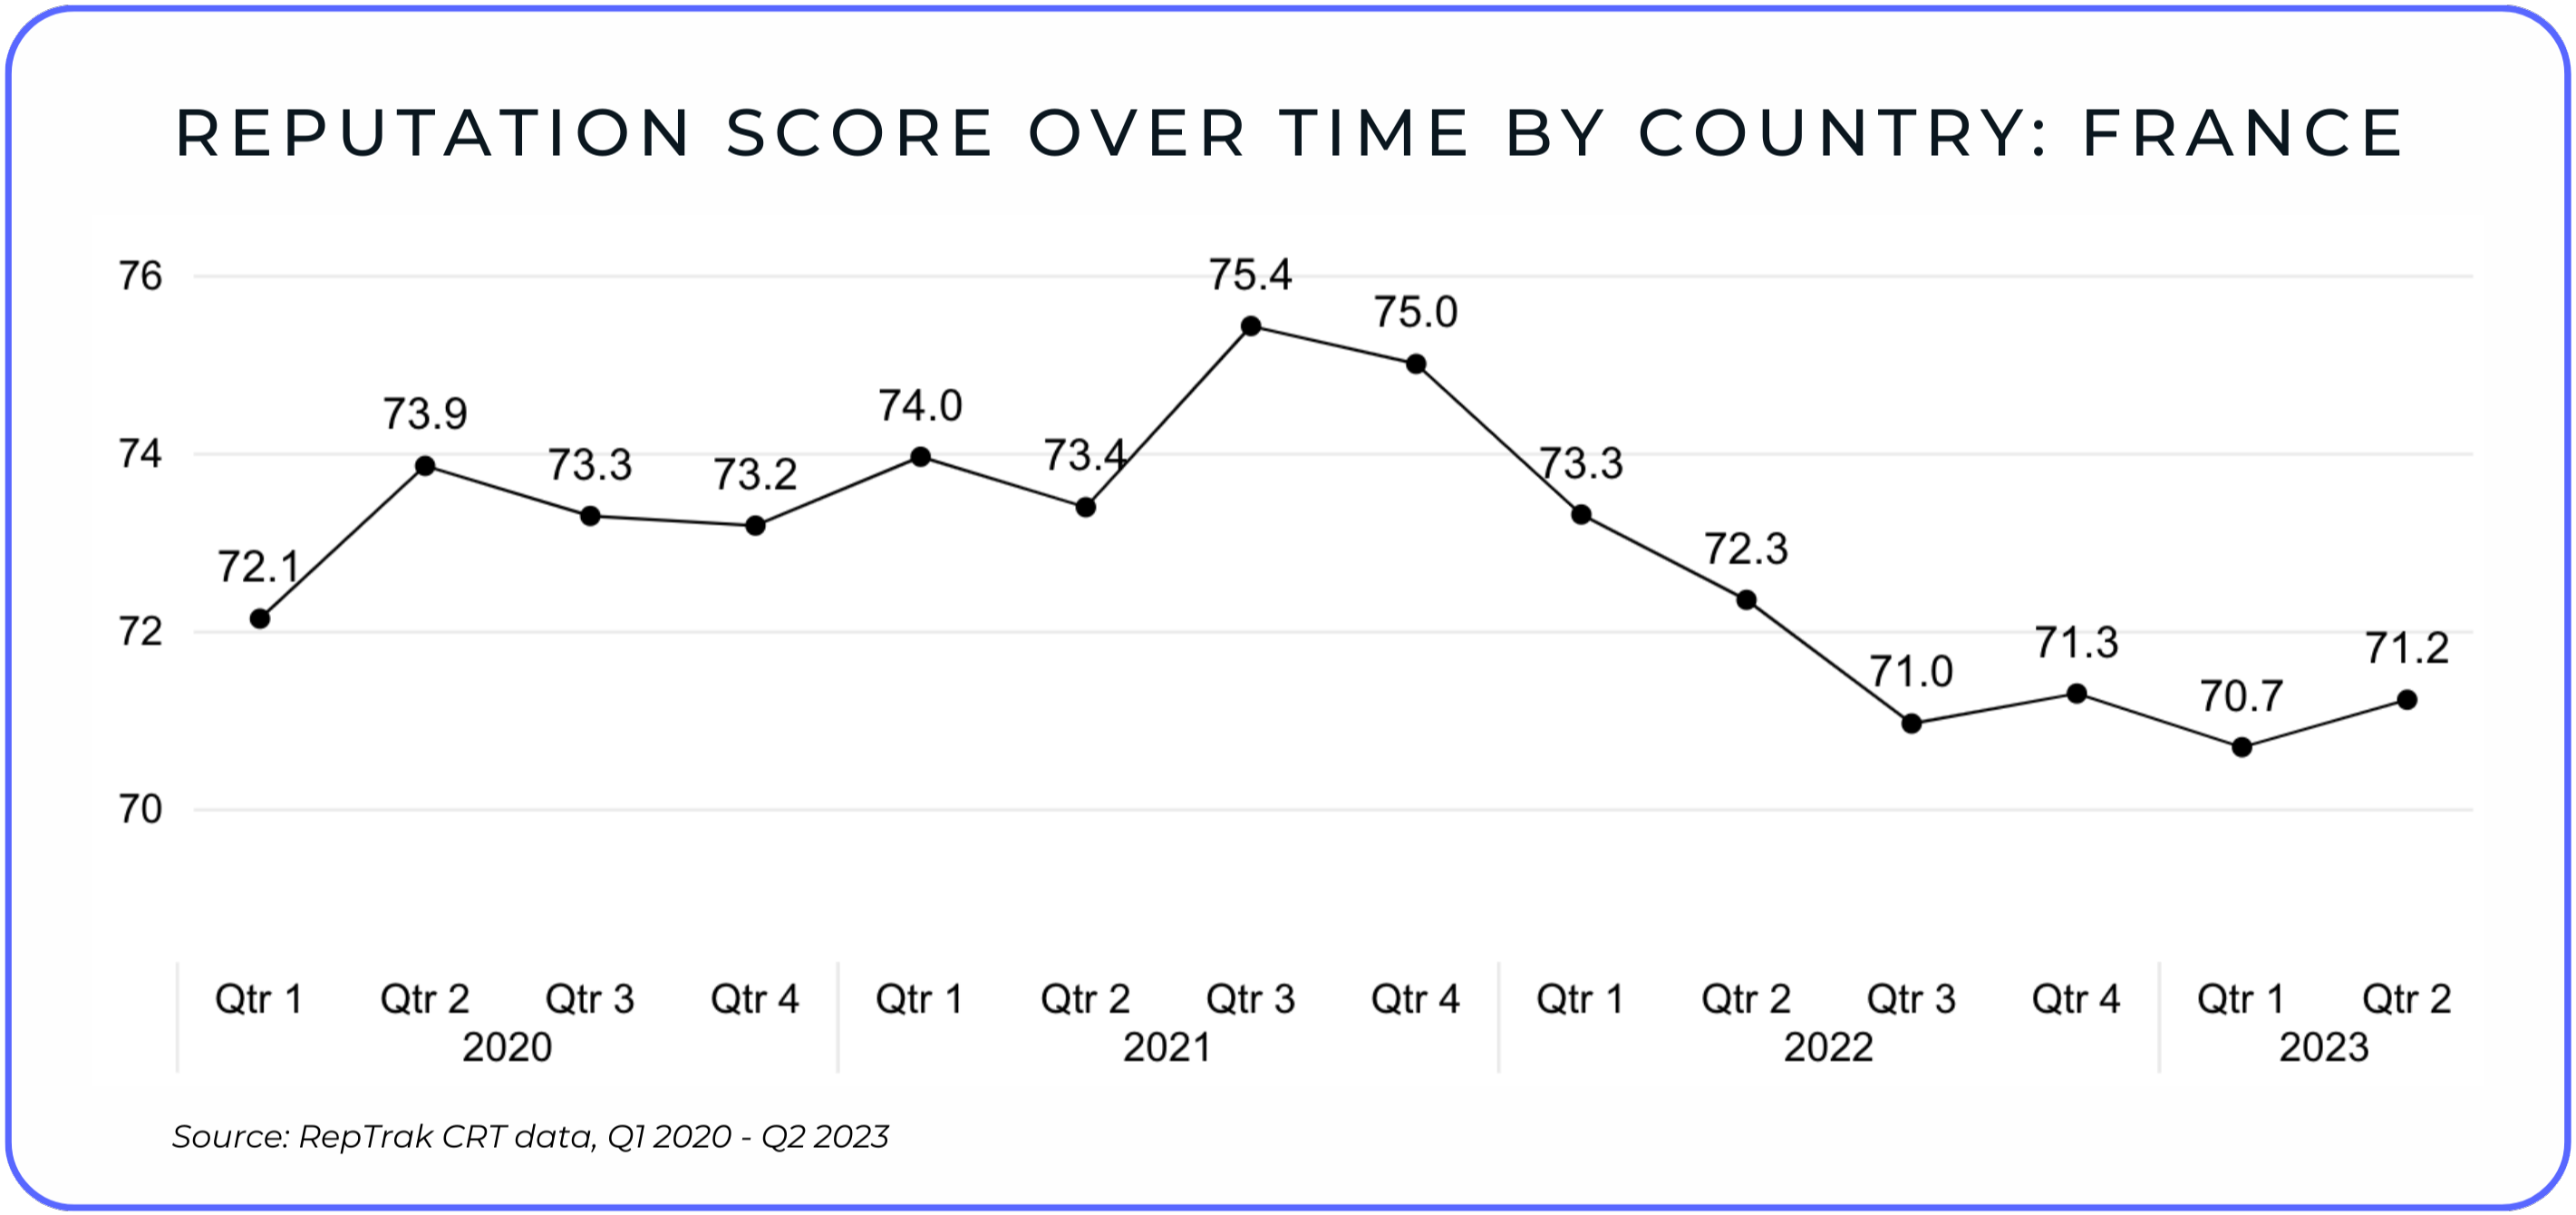 France Reputation Score Over Time